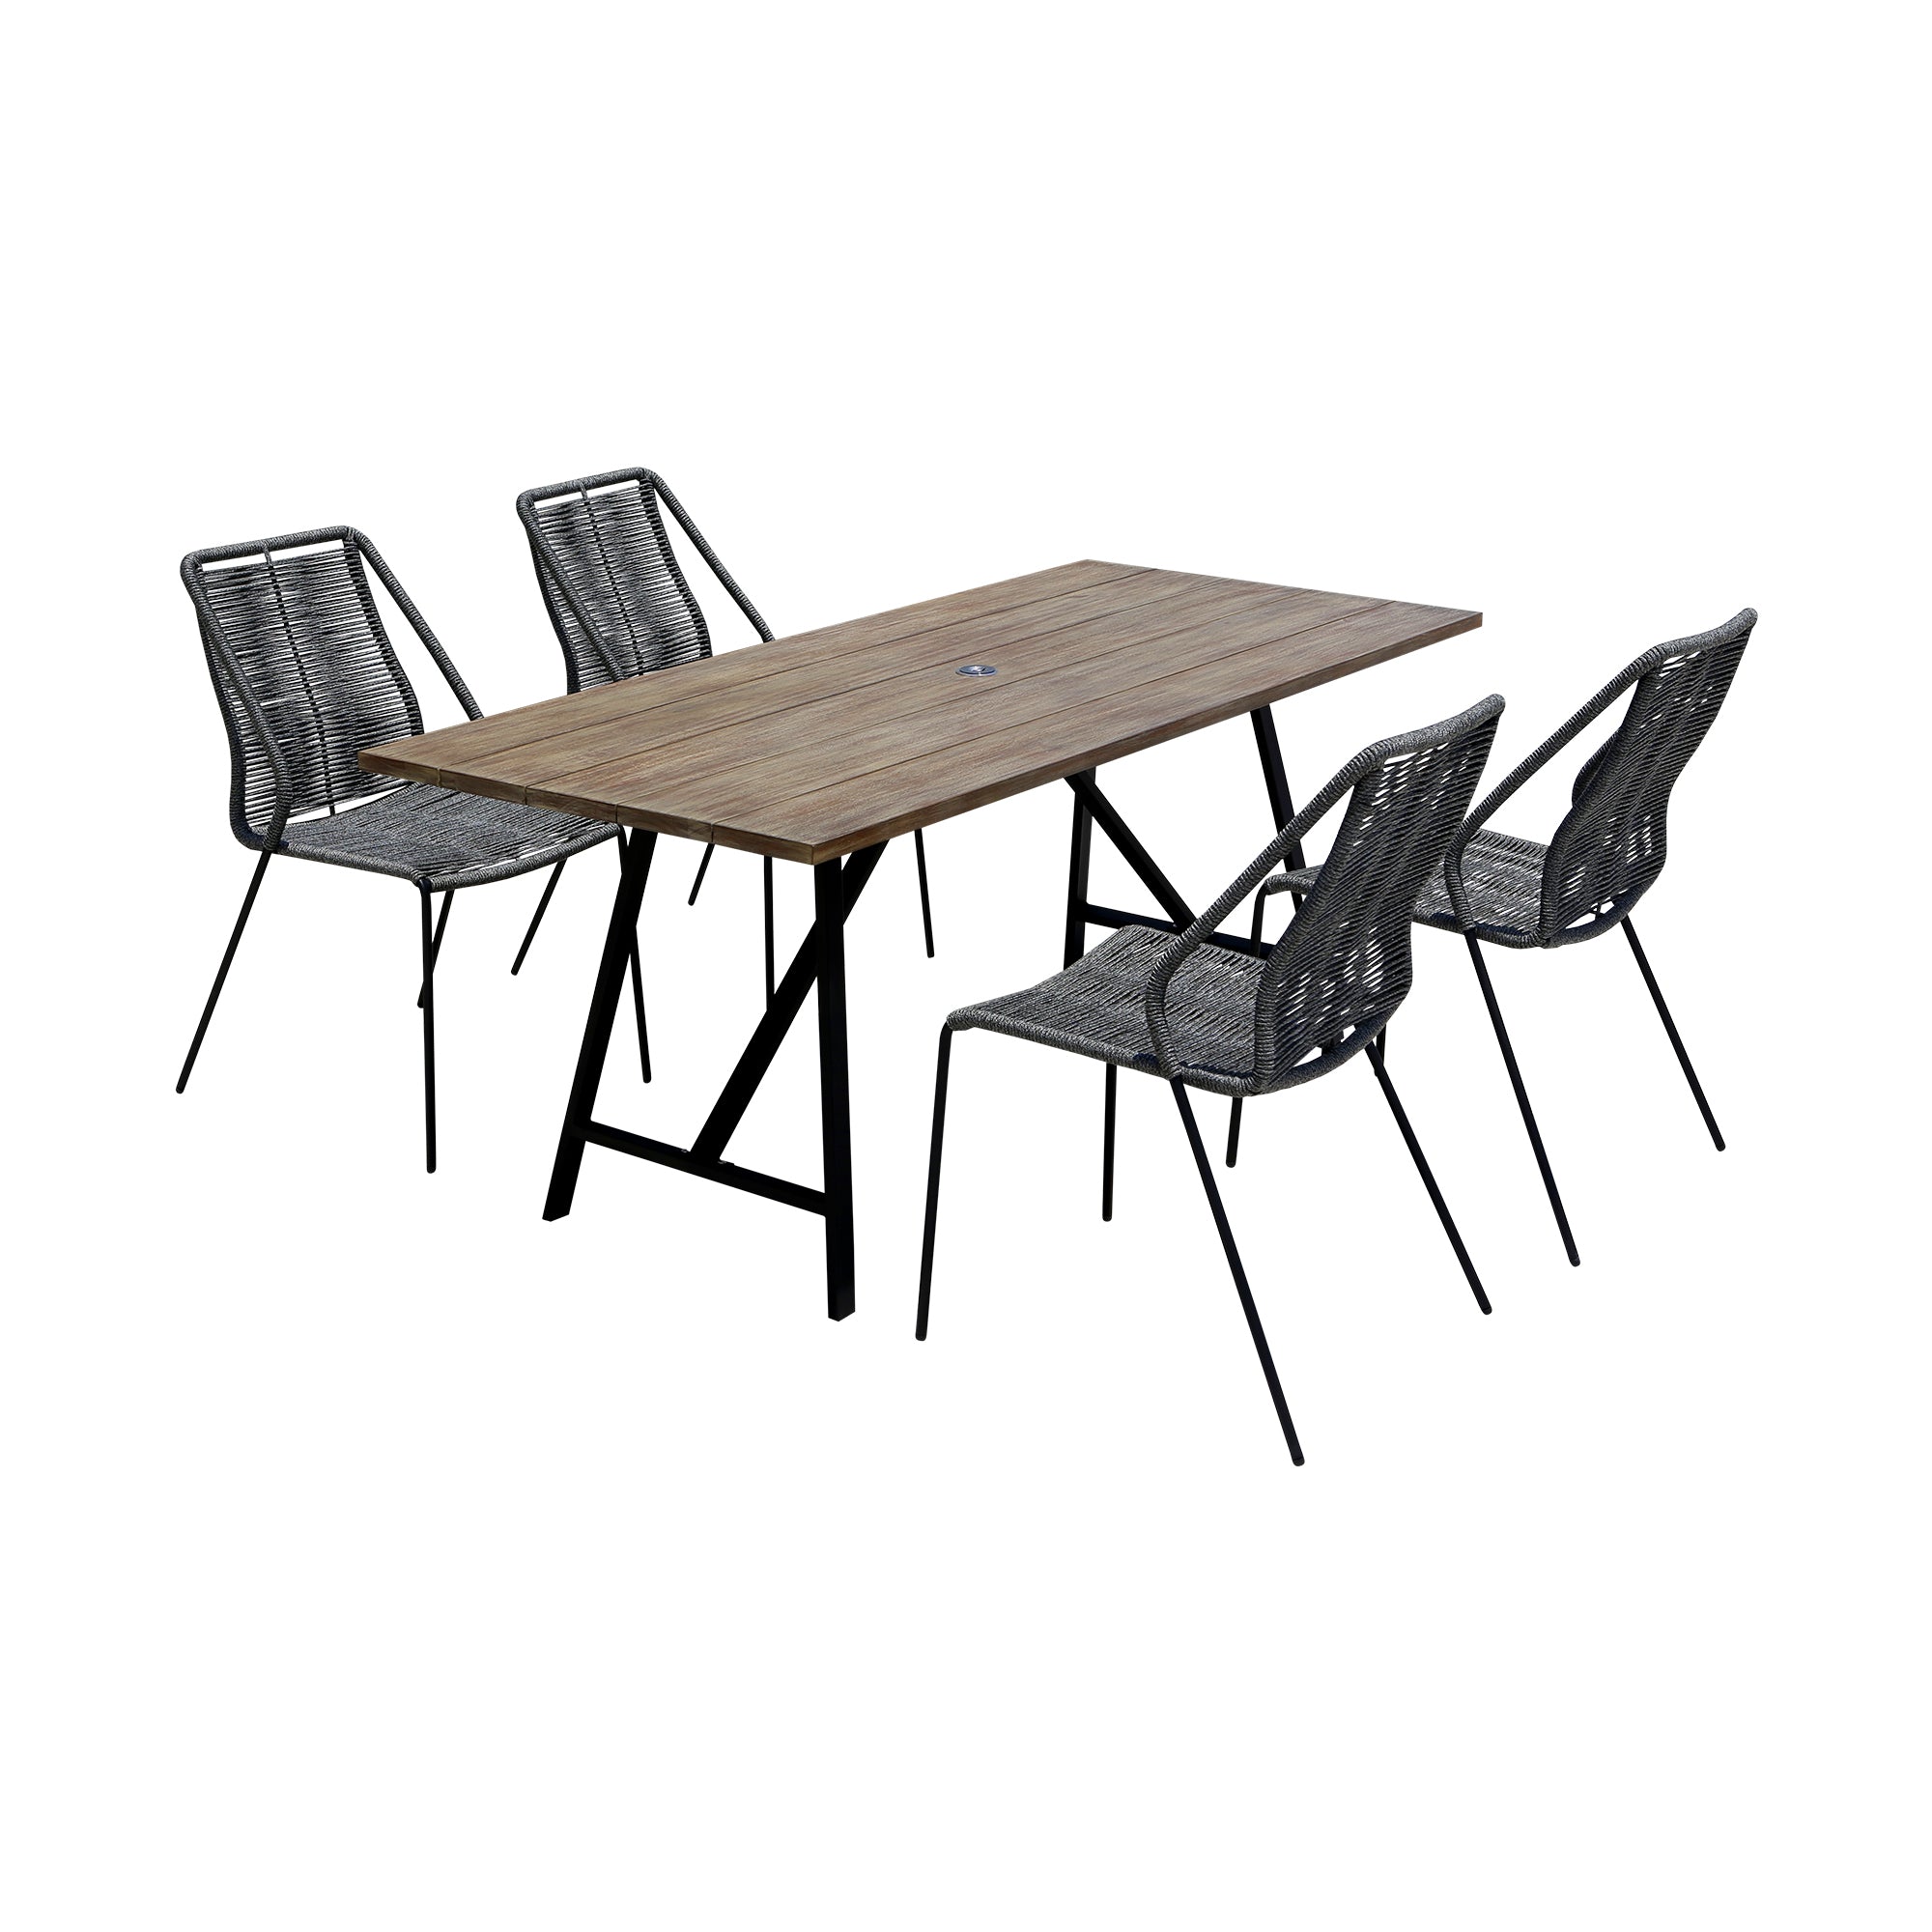 Armen Living - Koala and Clip 5 Piece Dining Set in Eucalyptus Wood and Metal with Rope  - 840254332331